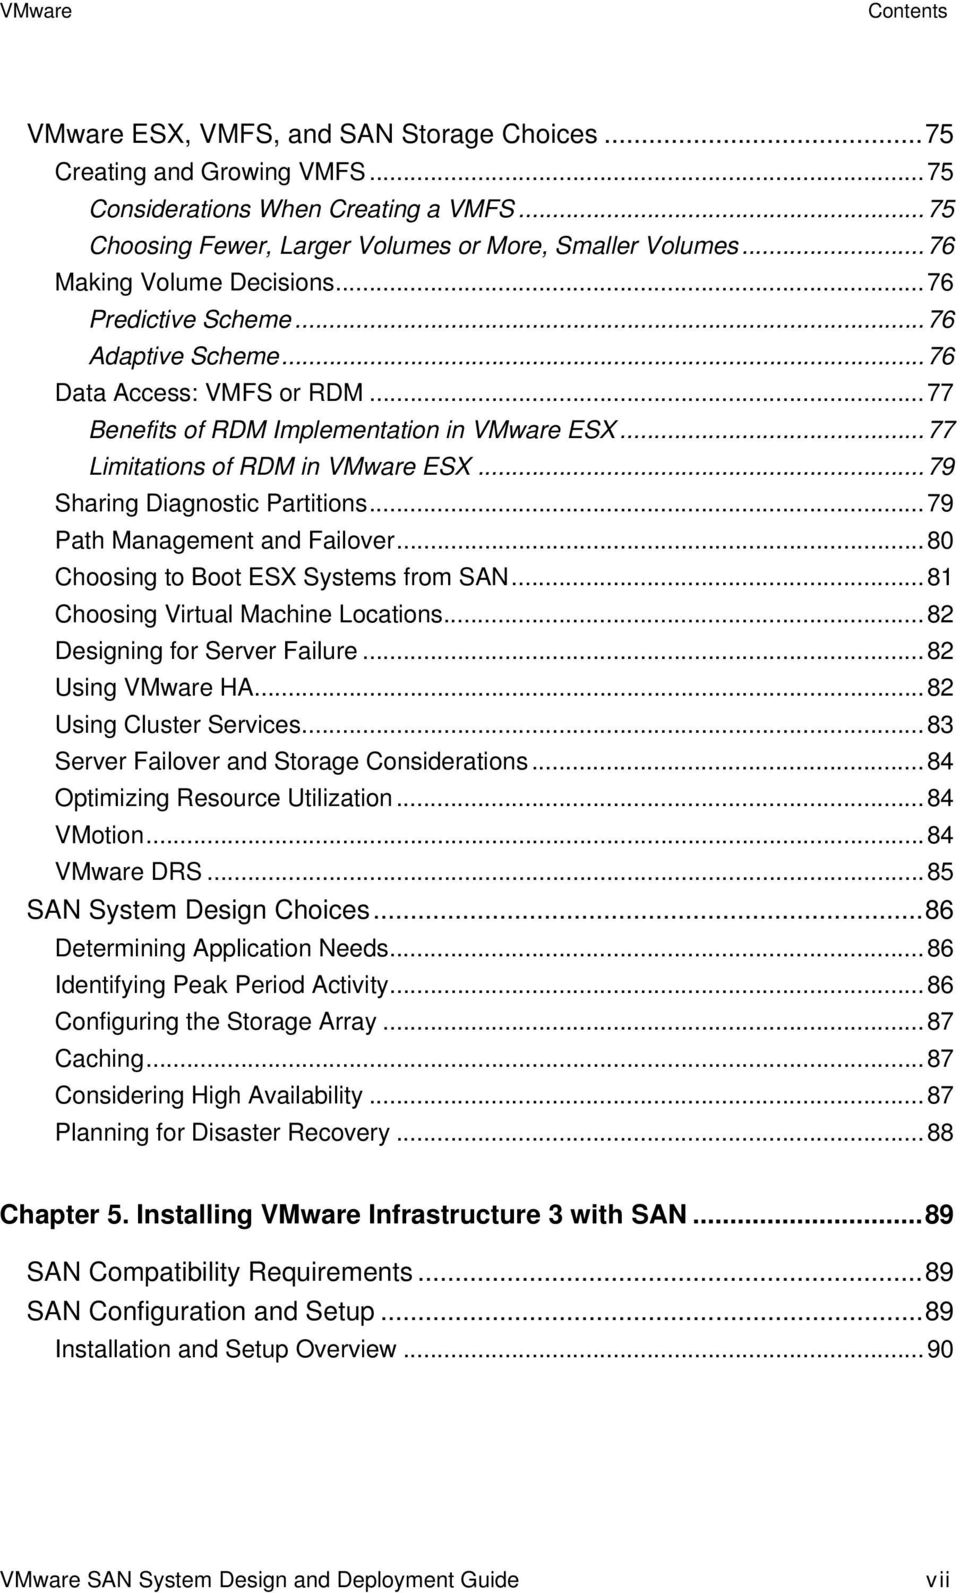 ..79 Sharing Diagnostic Partitions...79 Path Management and Failover...80 Choosing to Boot ESX Systems from SAN...81 Choosing Virtual Machine Locations...82 Designing for Server Failure.